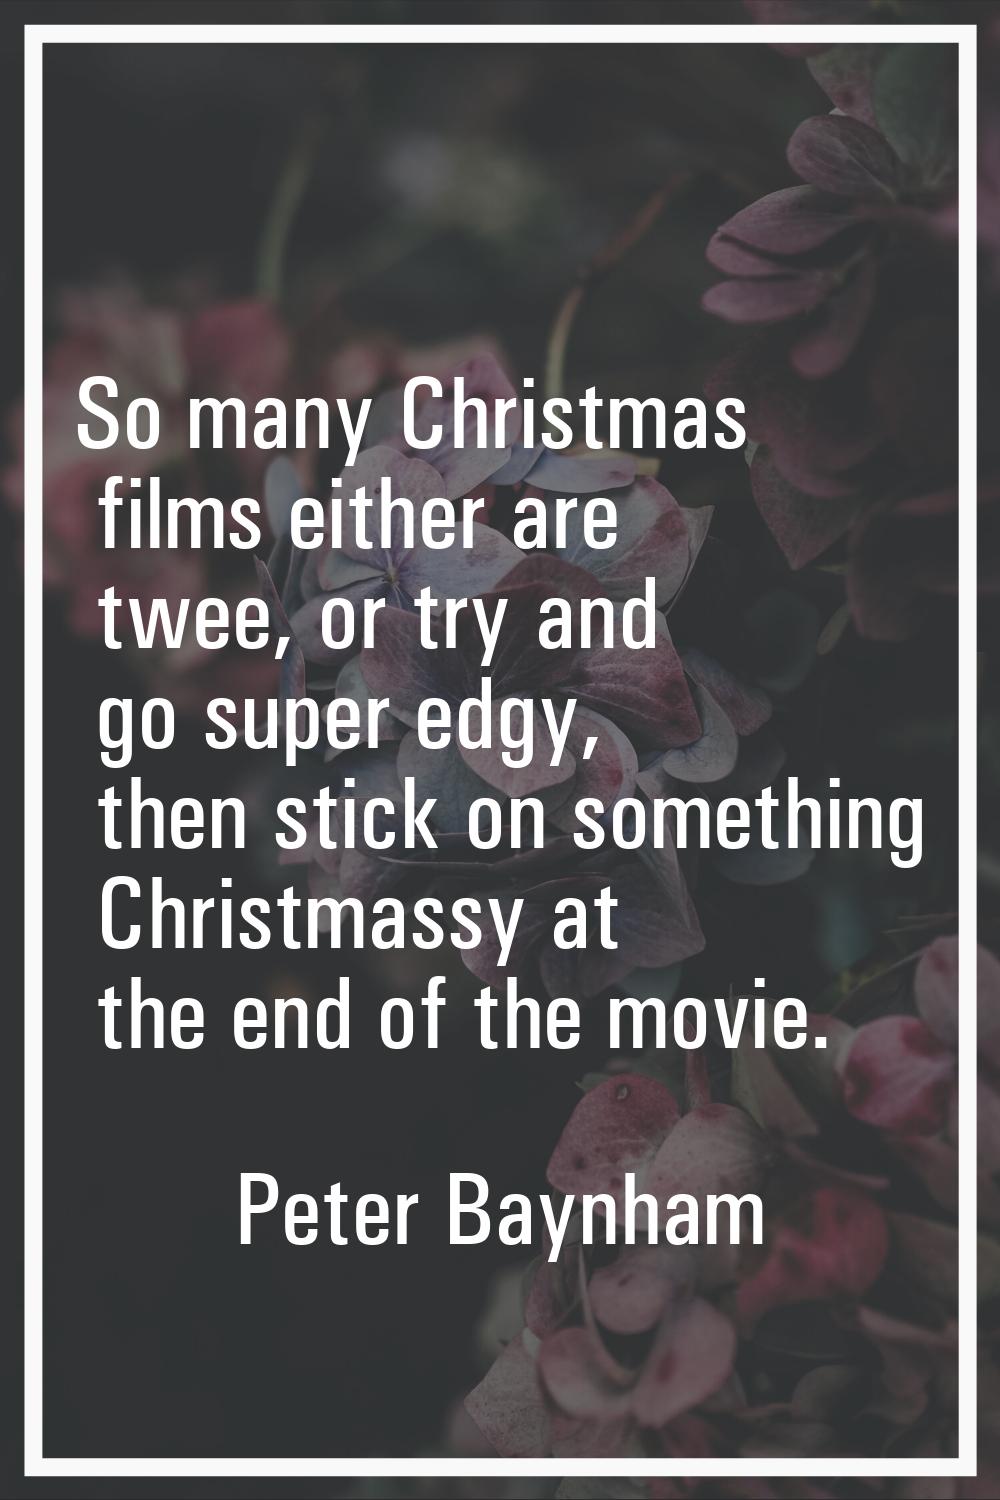 So many Christmas films either are twee, or try and go super edgy, then stick on something Christma